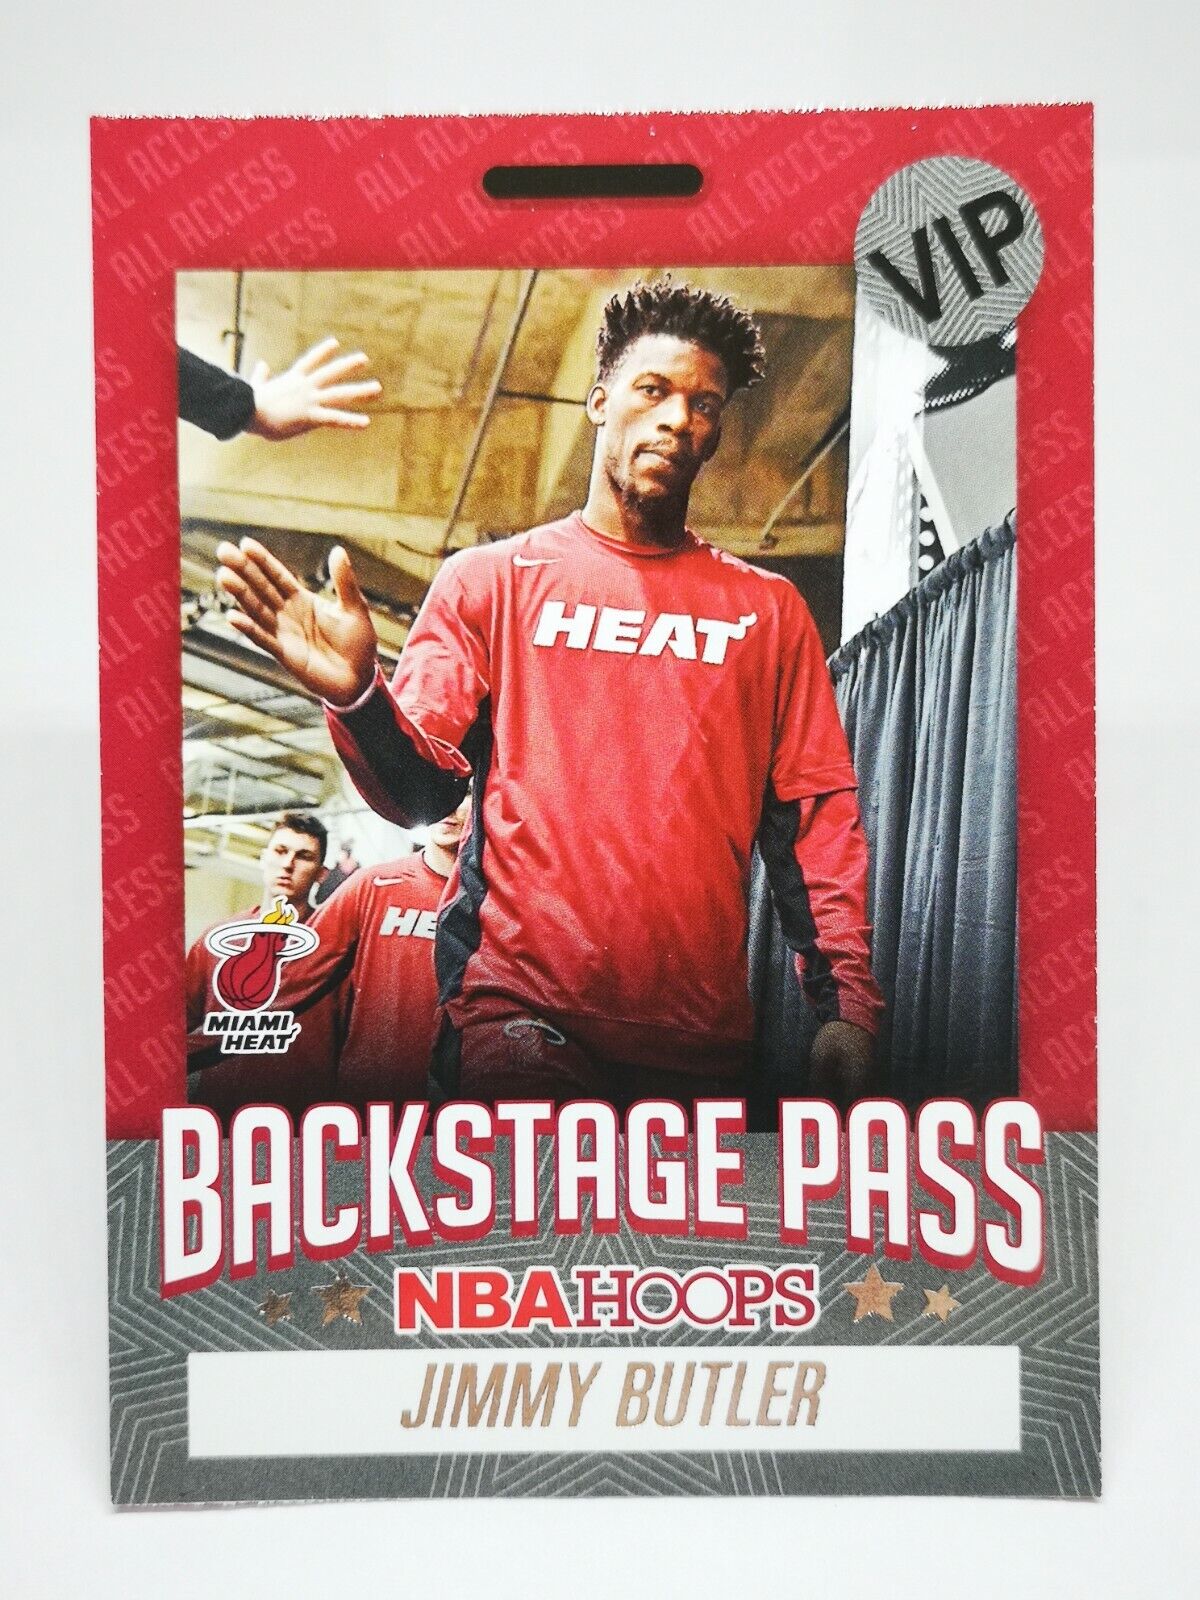 2020-21 Panini Hoops N19 Card NBA Back Stage Pass #4 Jimmy Butler Miami Heat